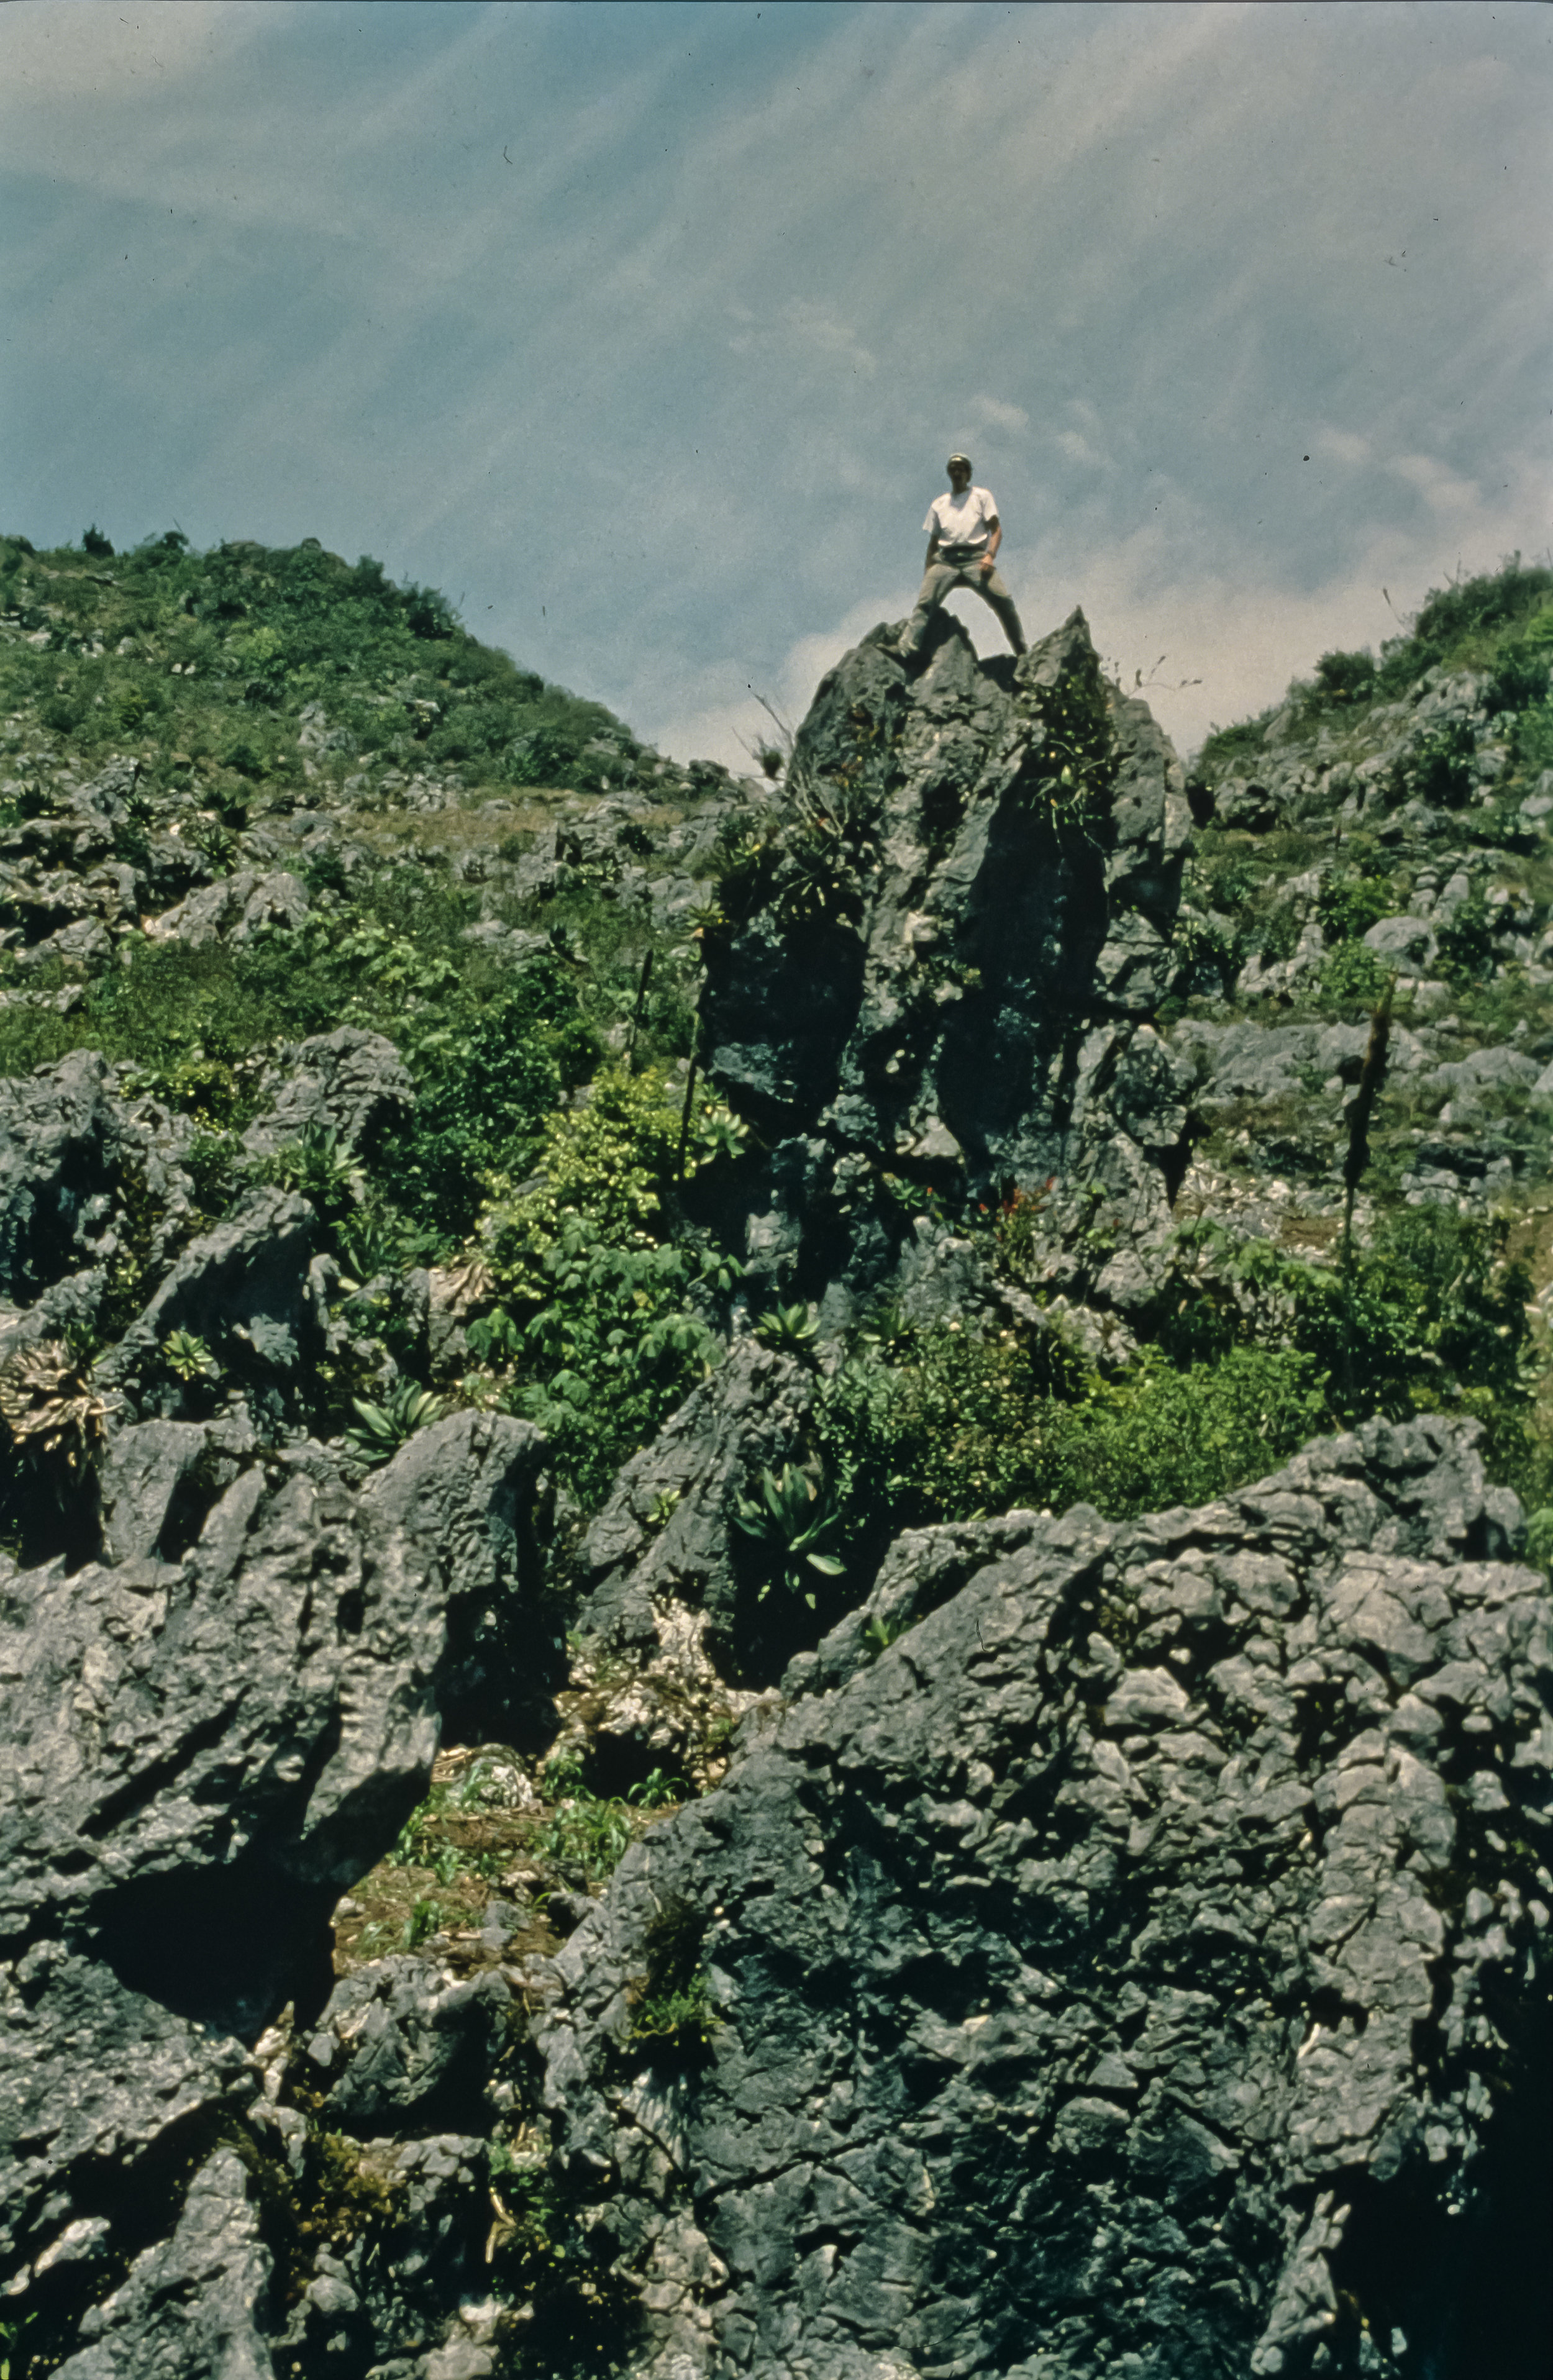  Bill Stone stands atop a spectacular karst pinnacle, one of many in the sinkholes between basecamp at the village of San Agustin Zaragoza and the southern rim of the Huautla Plateau. Photo by U. S. Deep Caving Team/Bill Stone. 